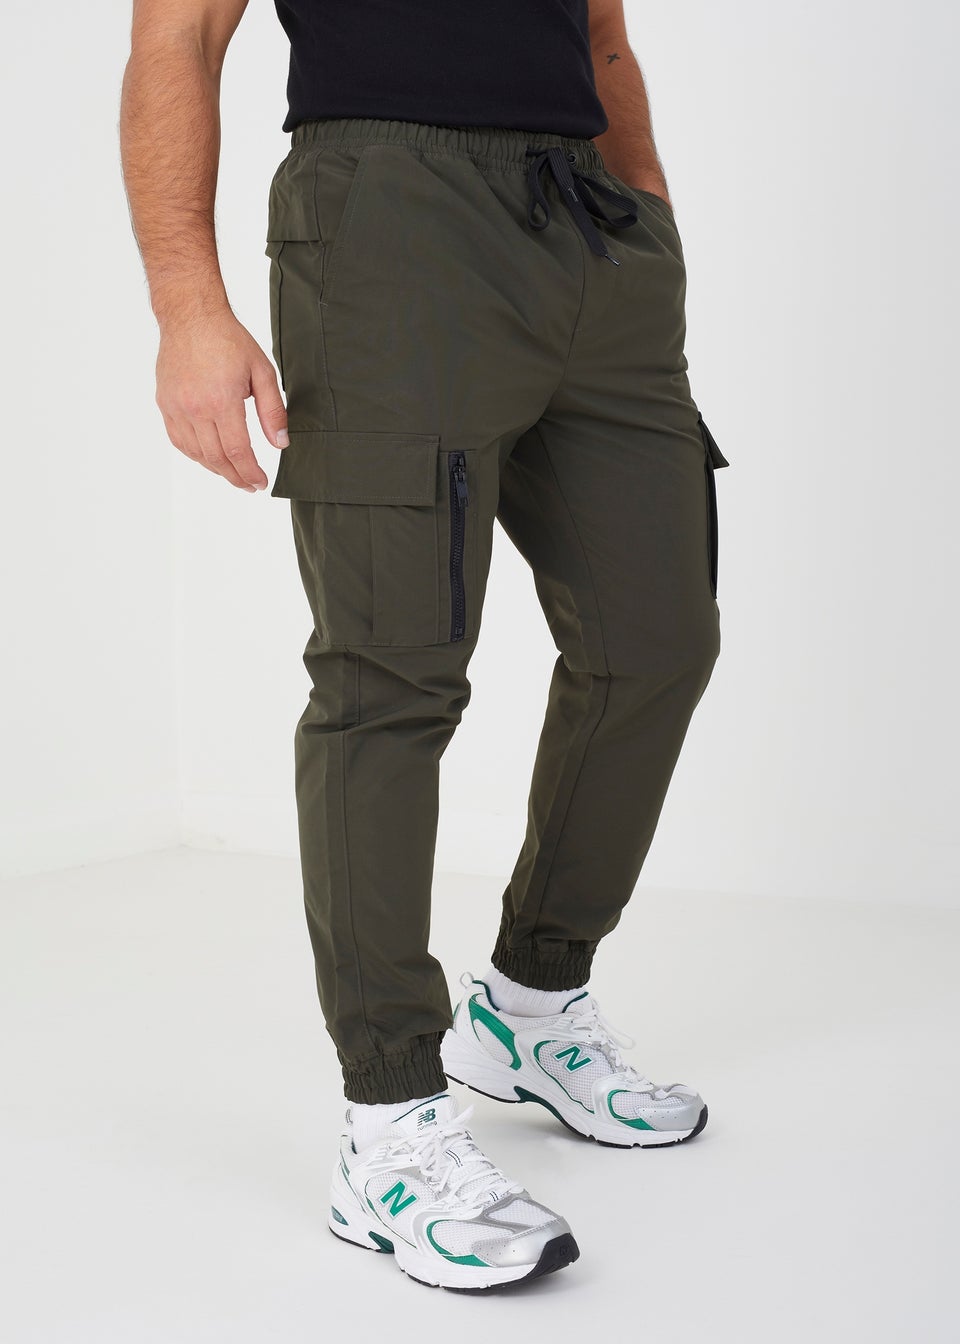 Tops To Go With Cargo Pants Mens | International Society of Precision  Agriculture